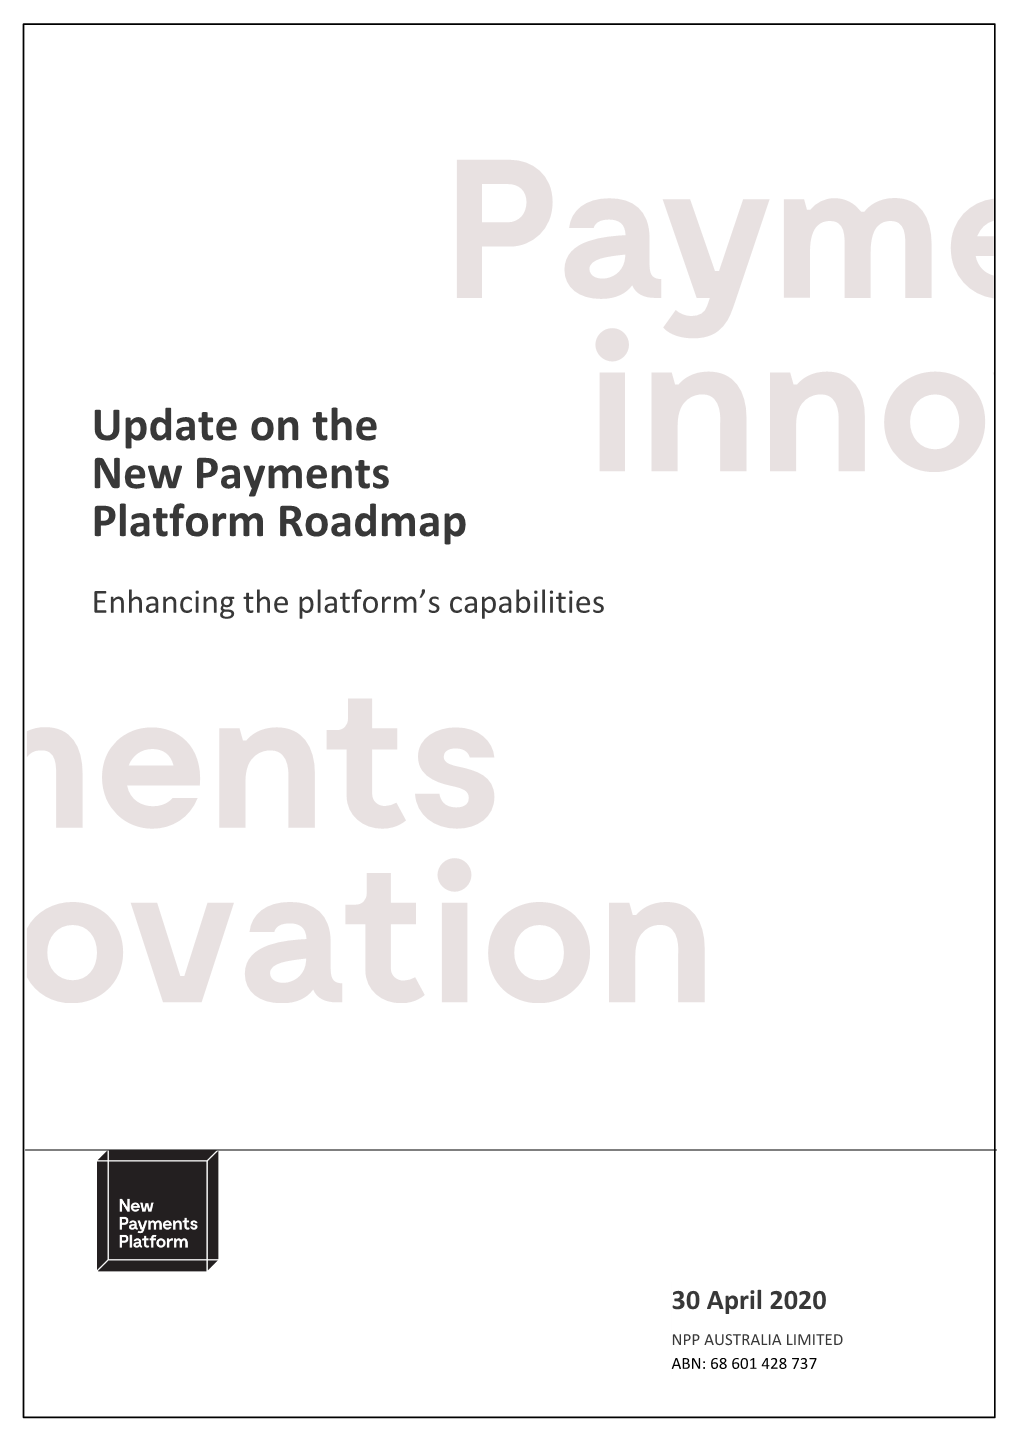 Update on the New Payments Platform Roadmap